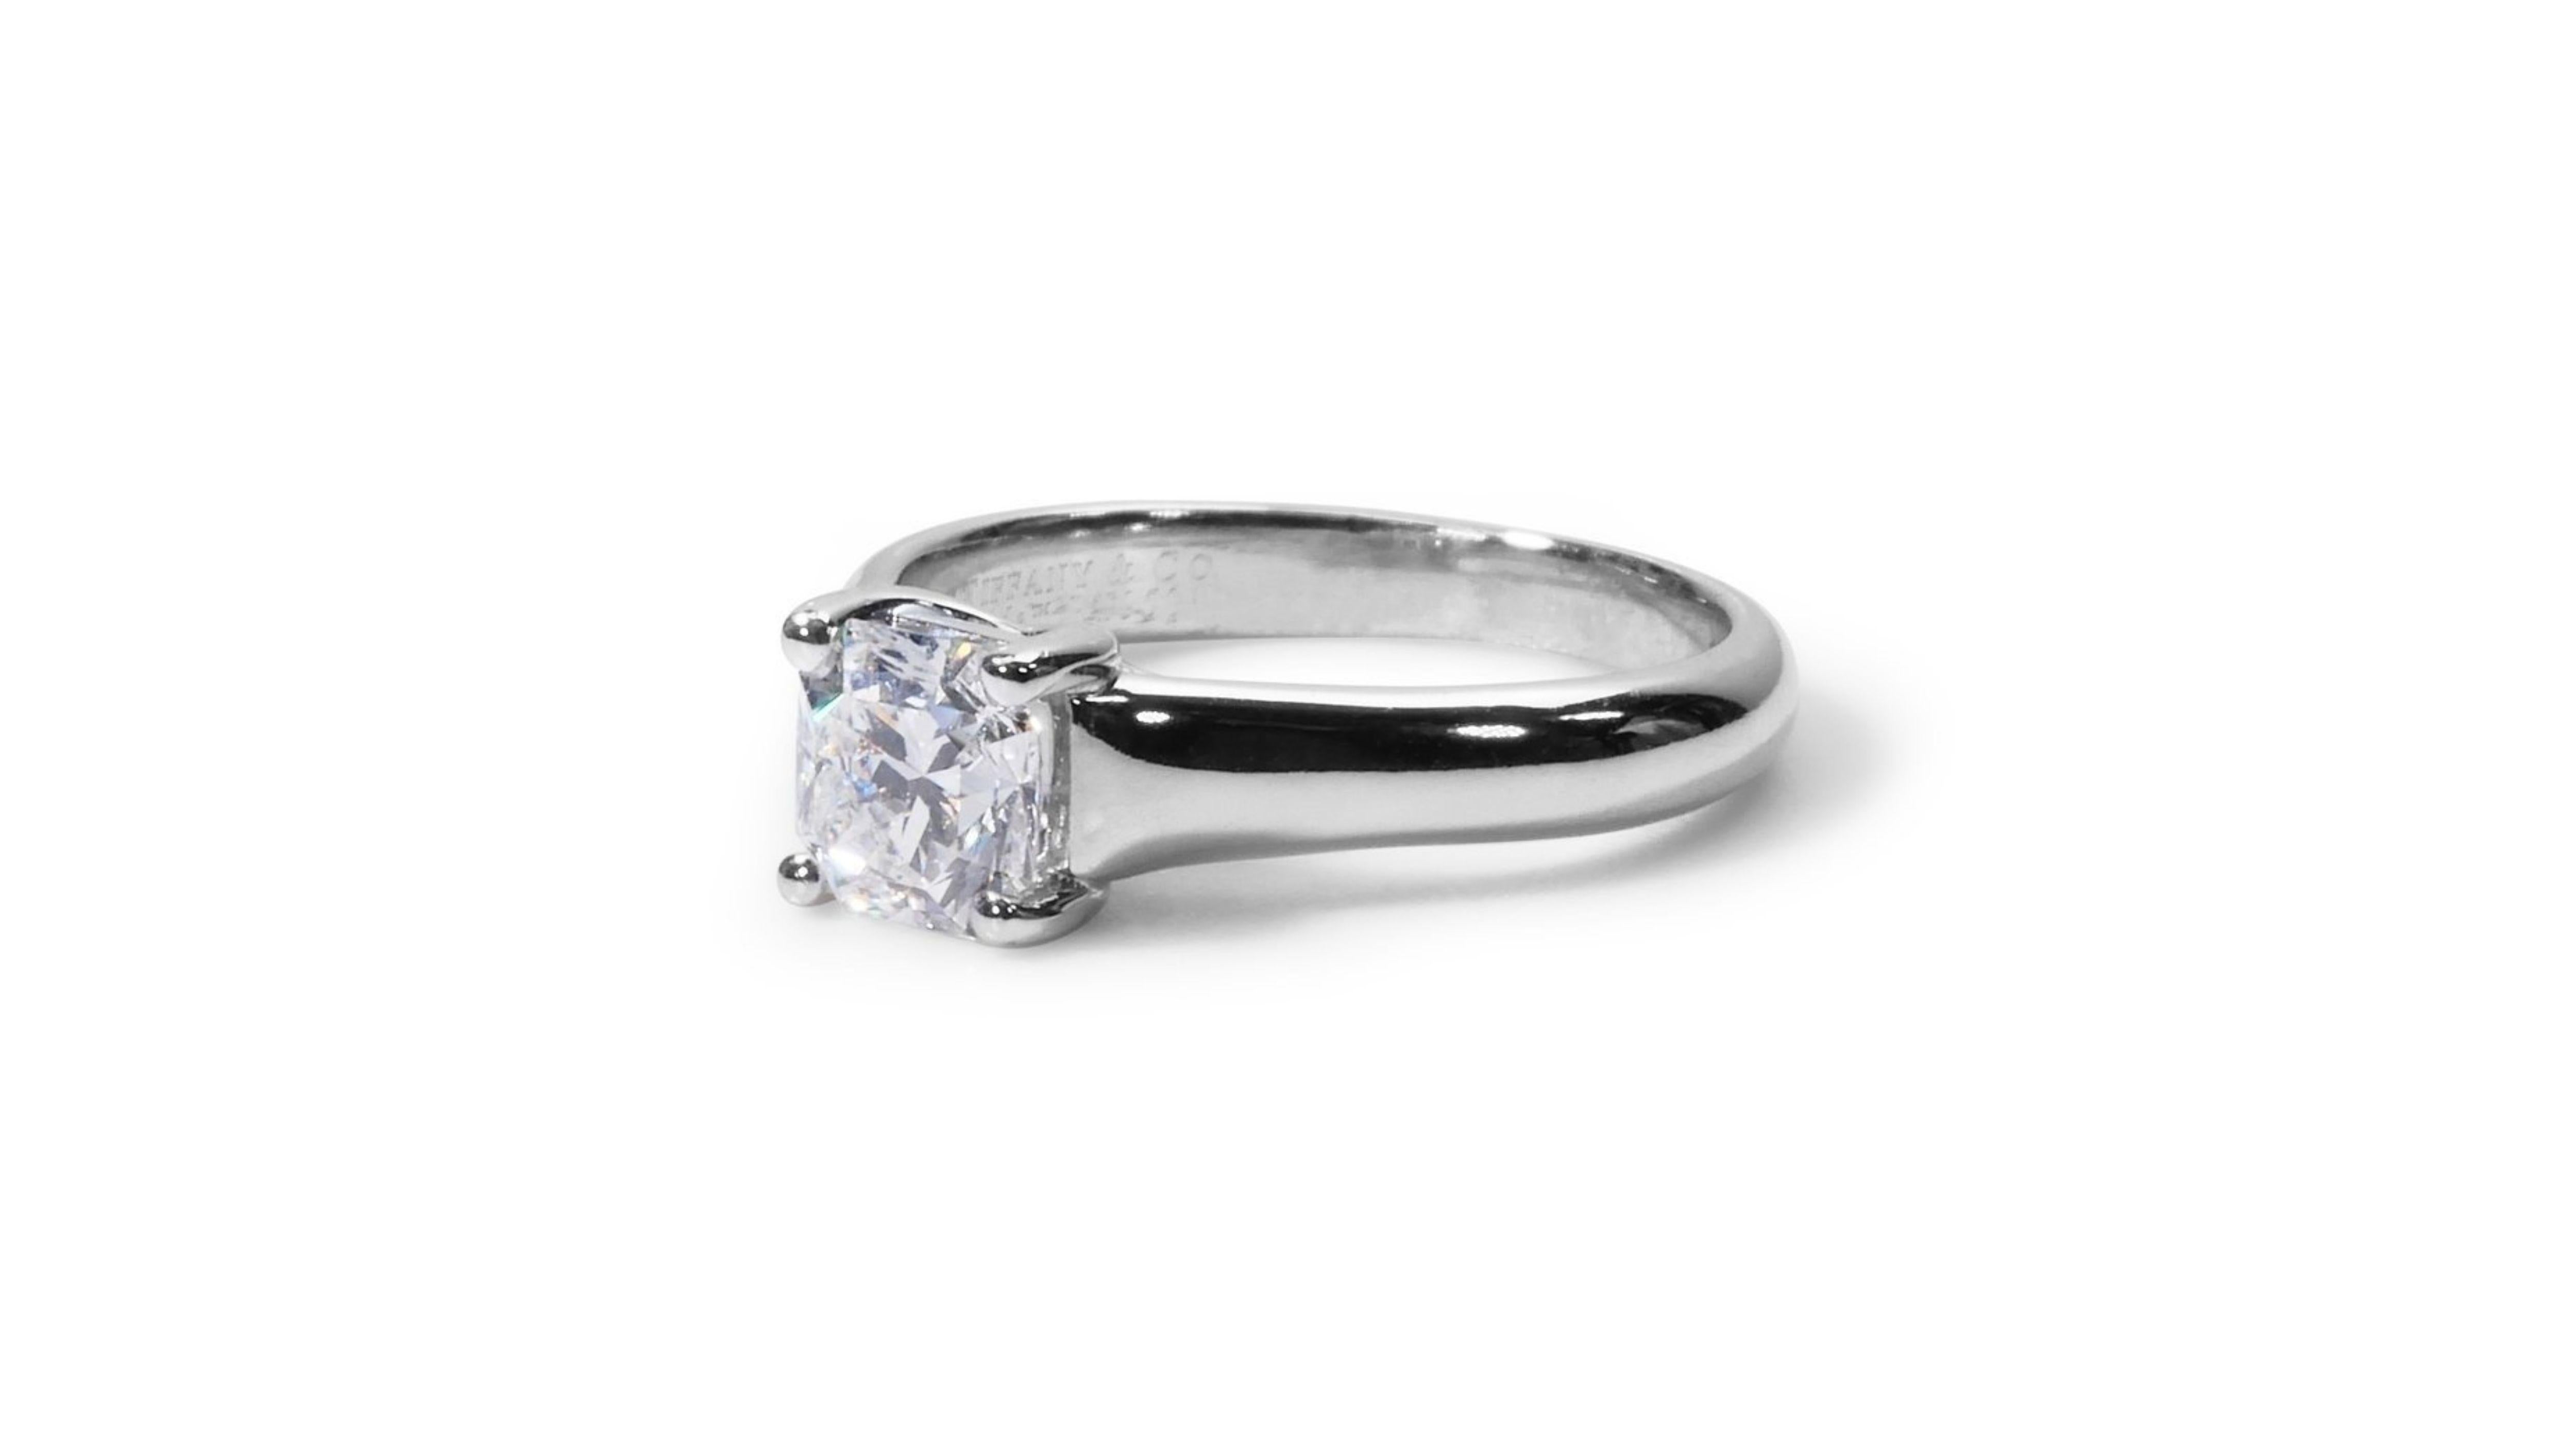 Women's Stunning Solitaire Platinum Ring with 0.80 total carat of Natural Diamond For Sale